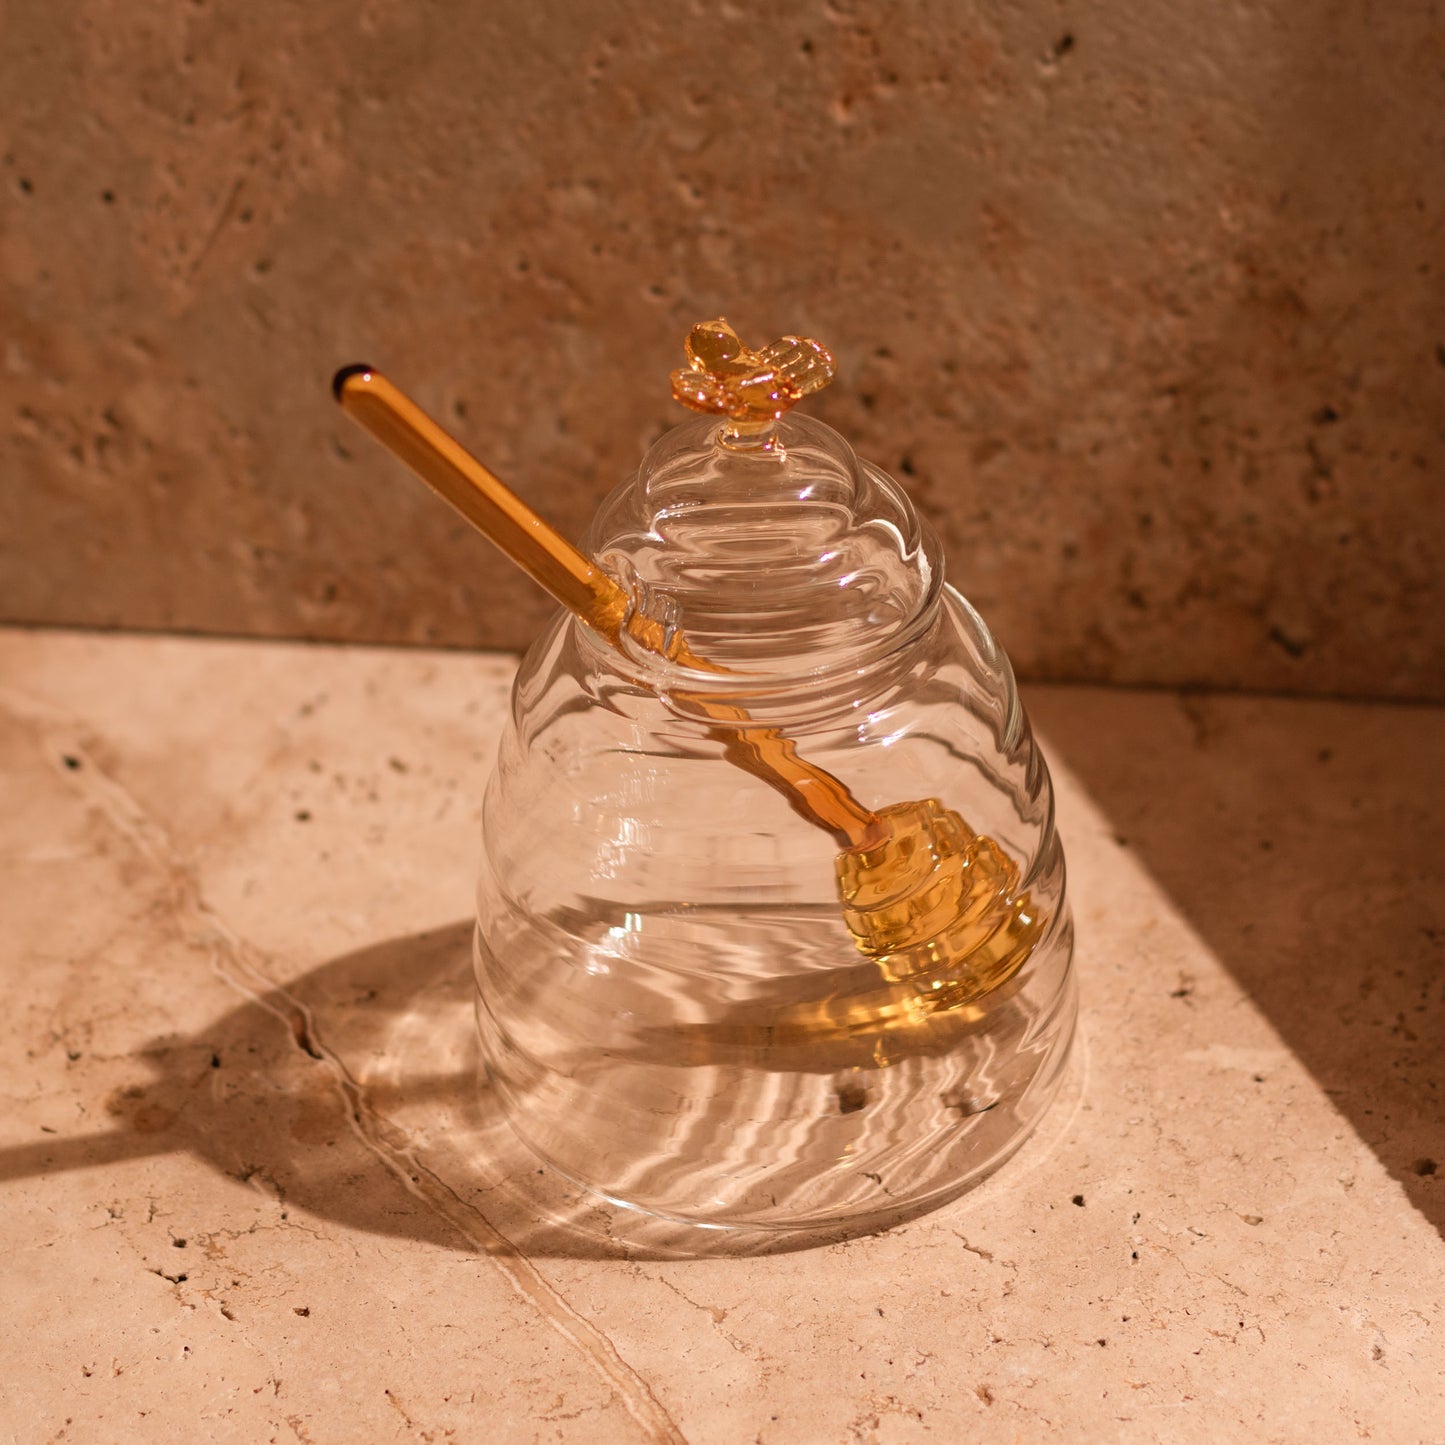 Hive Glass Honey Pot with Dipper